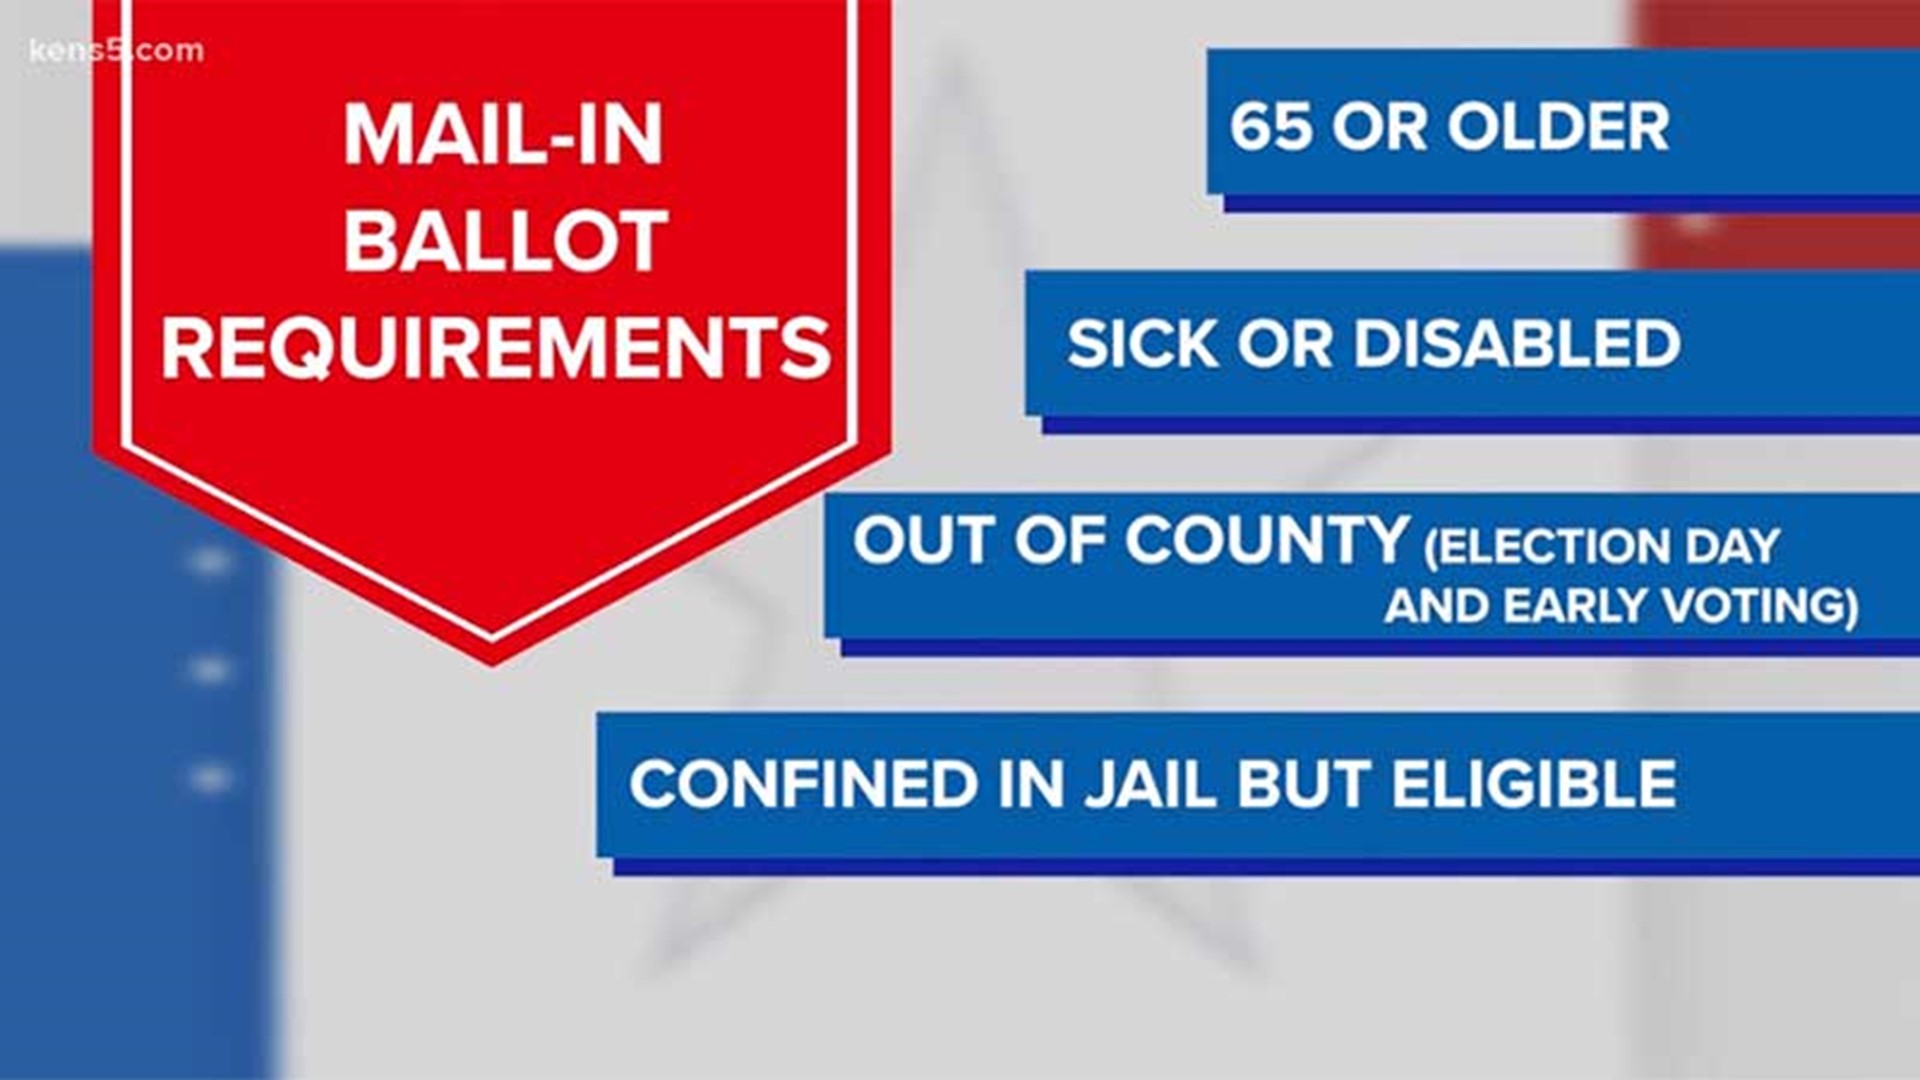 In Texas you must be 65 or older, be sick or disabled, be out of your county on election day, or be confined in jail but eligible to vote.